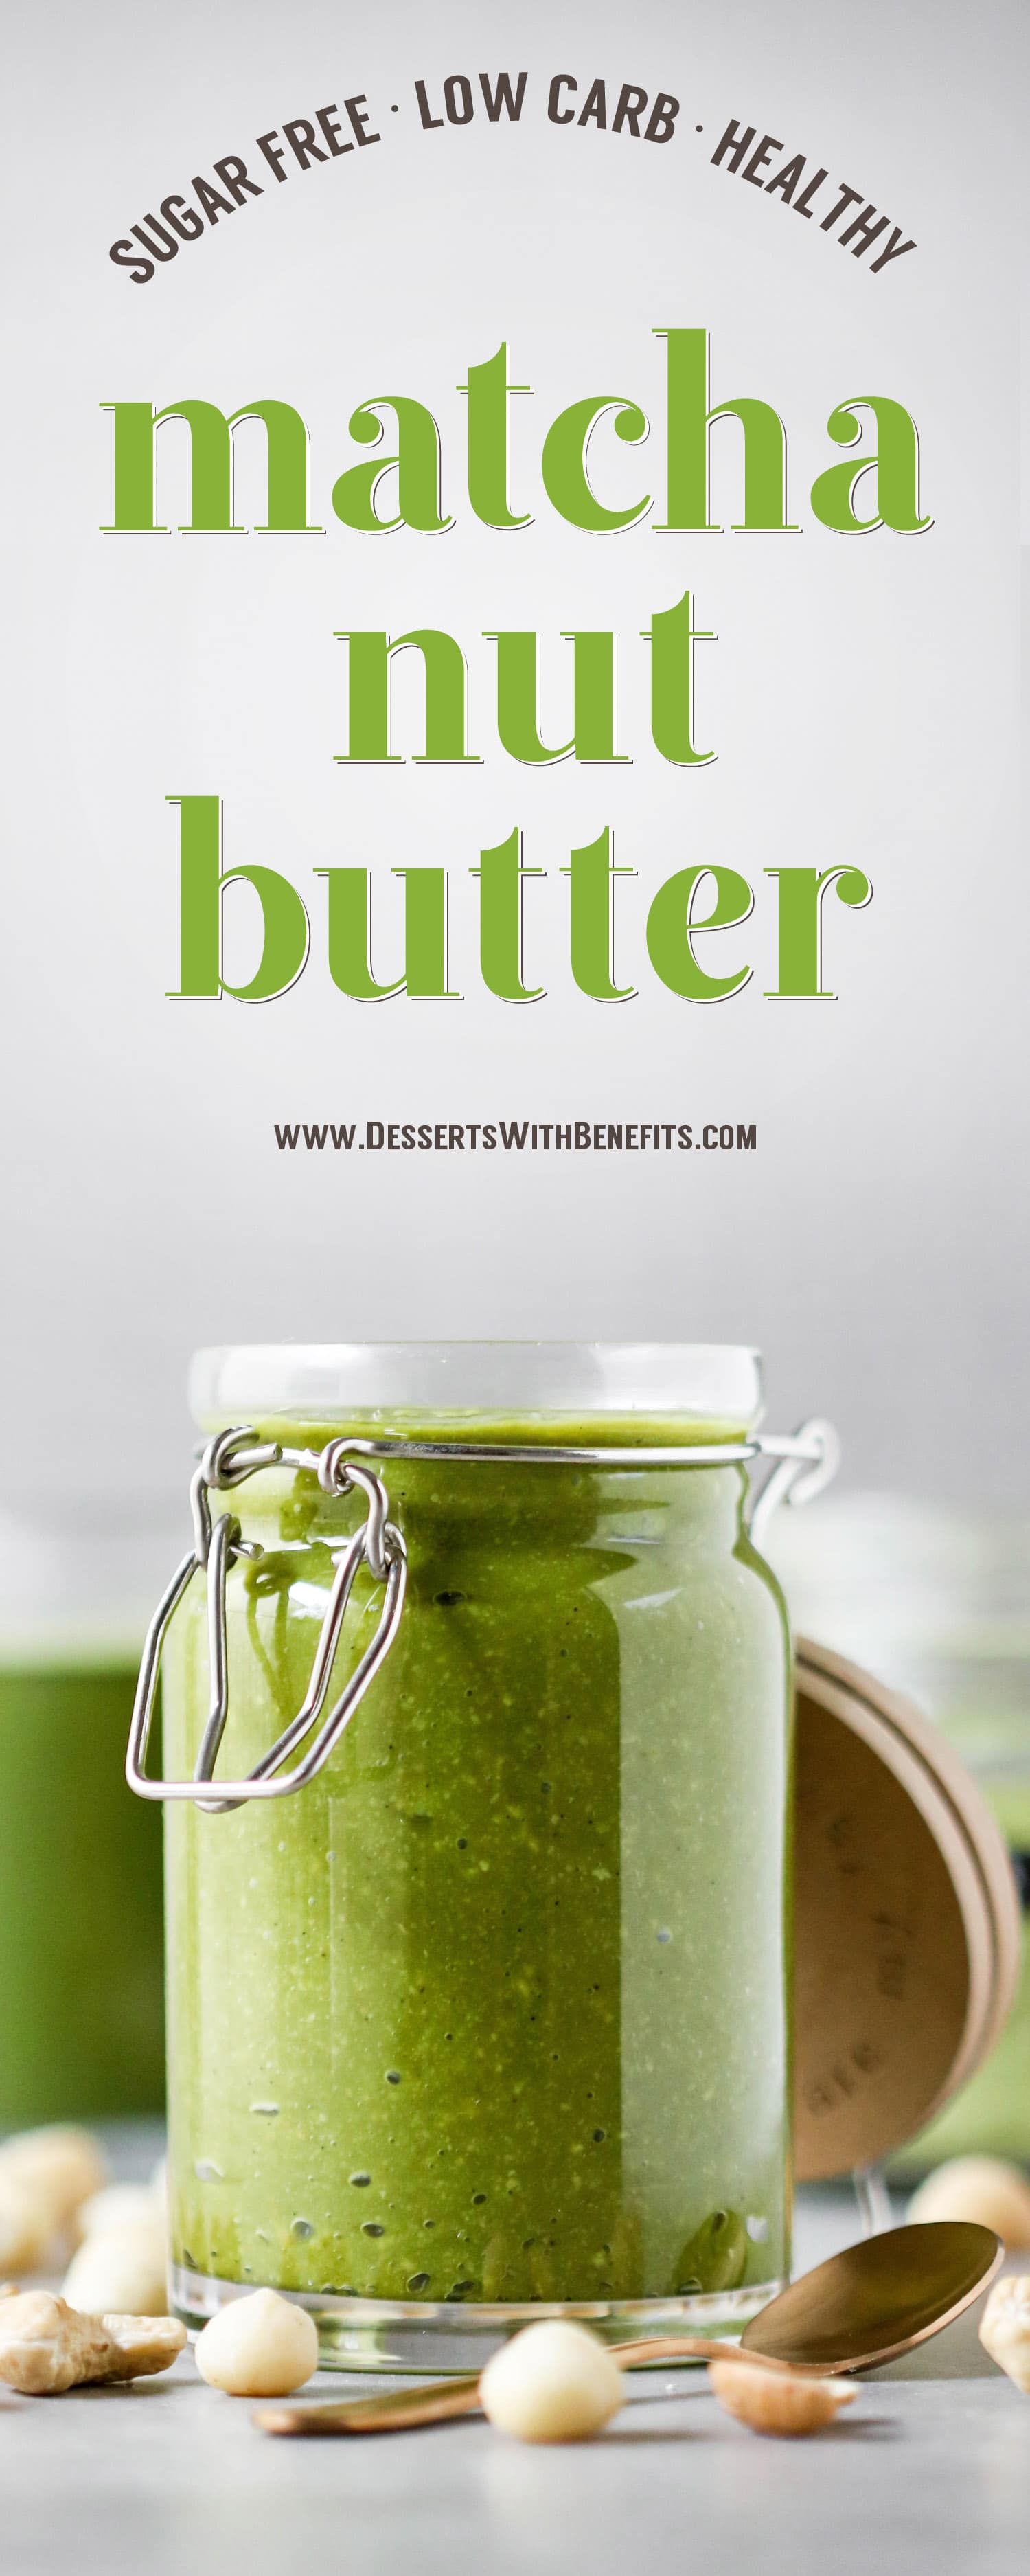 This 5-ingredient Healthy Matcha Green Tea Nut Butter is earthy from the matcha and rich and buttery from the macadamia nuts and cashews. Super easy, creamy, and addictive, yet sugar free, low carb, gluten free, dairy free, and vegan. It's just begging to be dug into with a spoon!